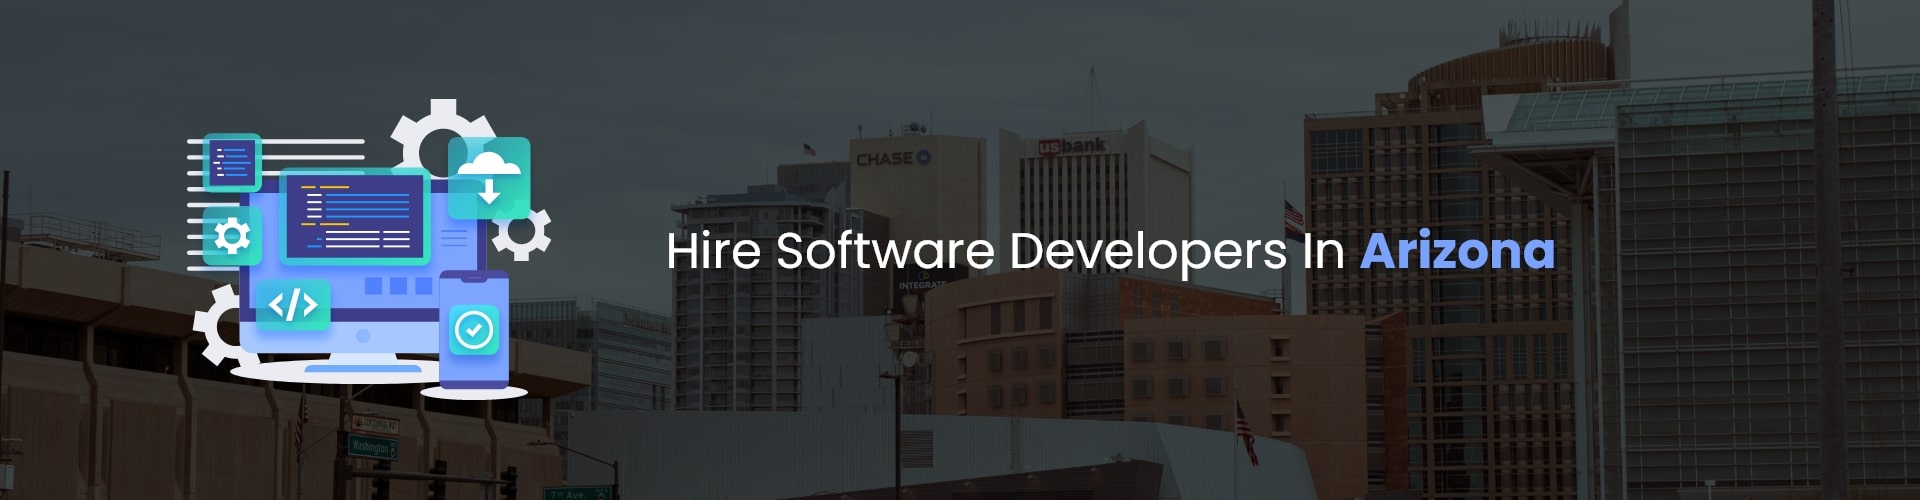 hire software developers in arizona